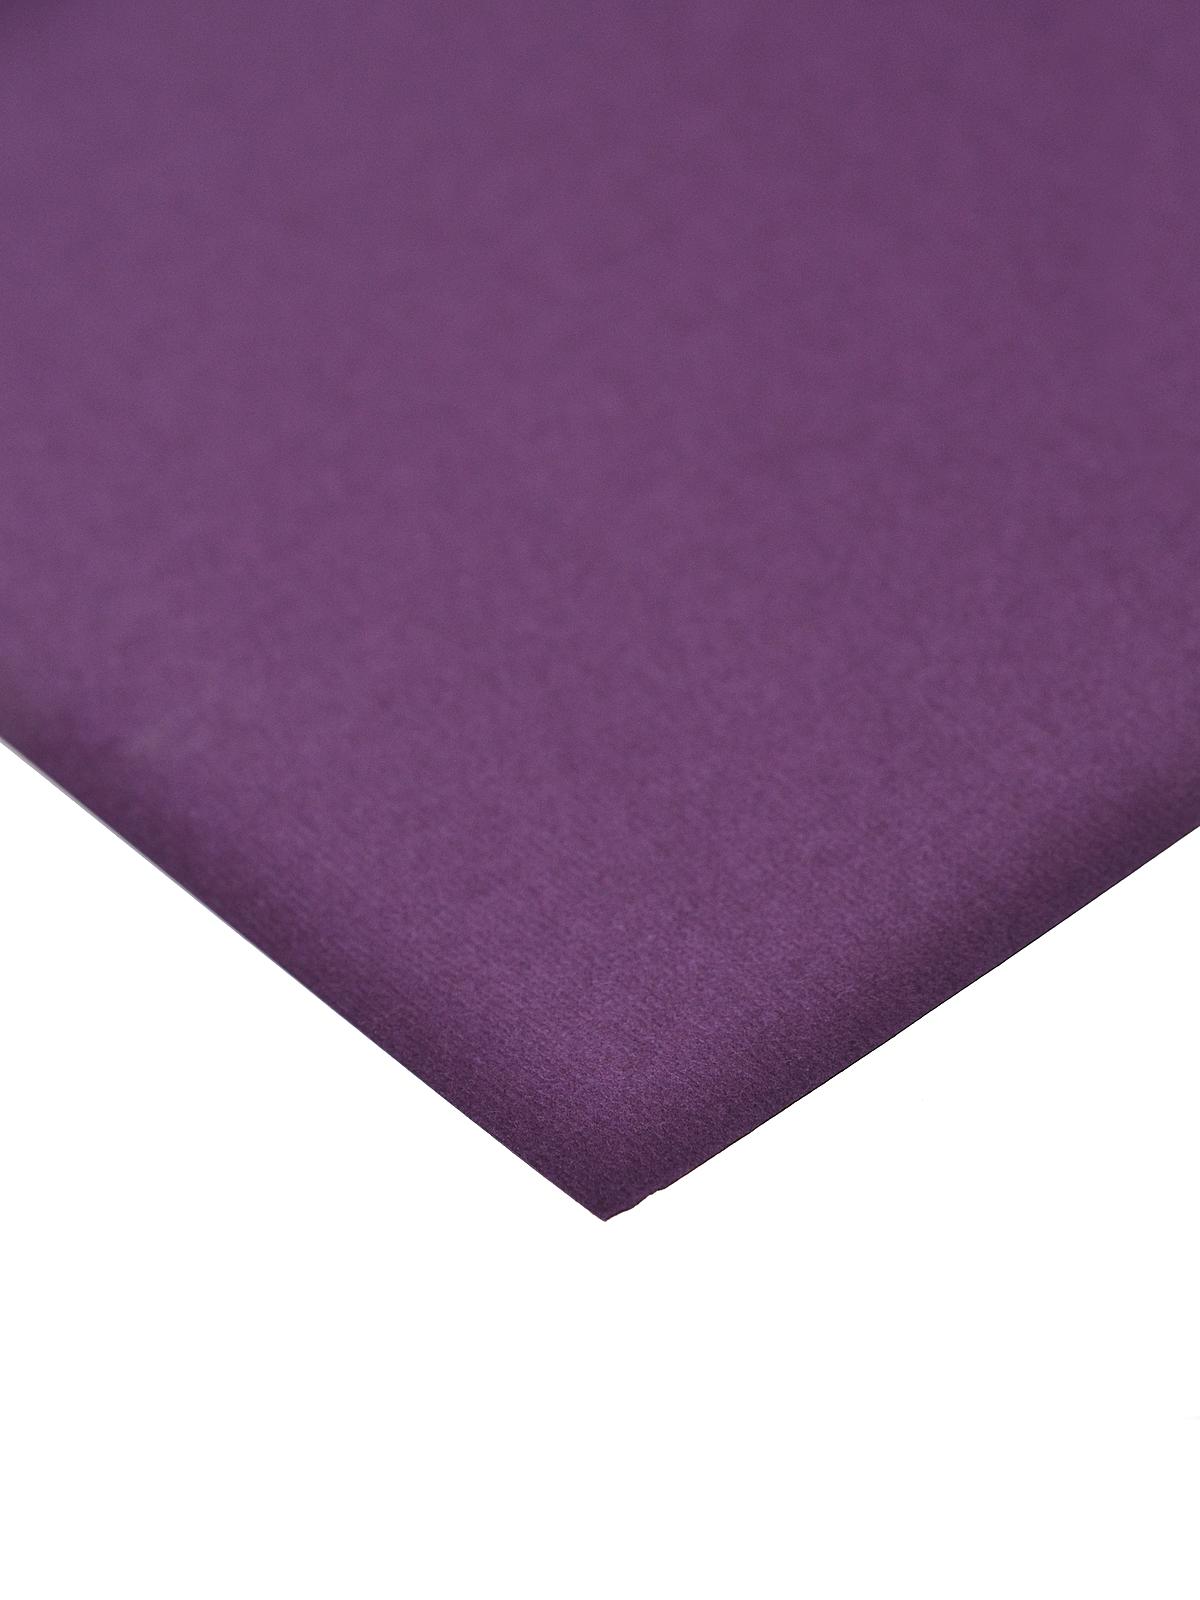 80 Lb. Canvas 8.5 In. X 11 In. Sheet Concord Jam